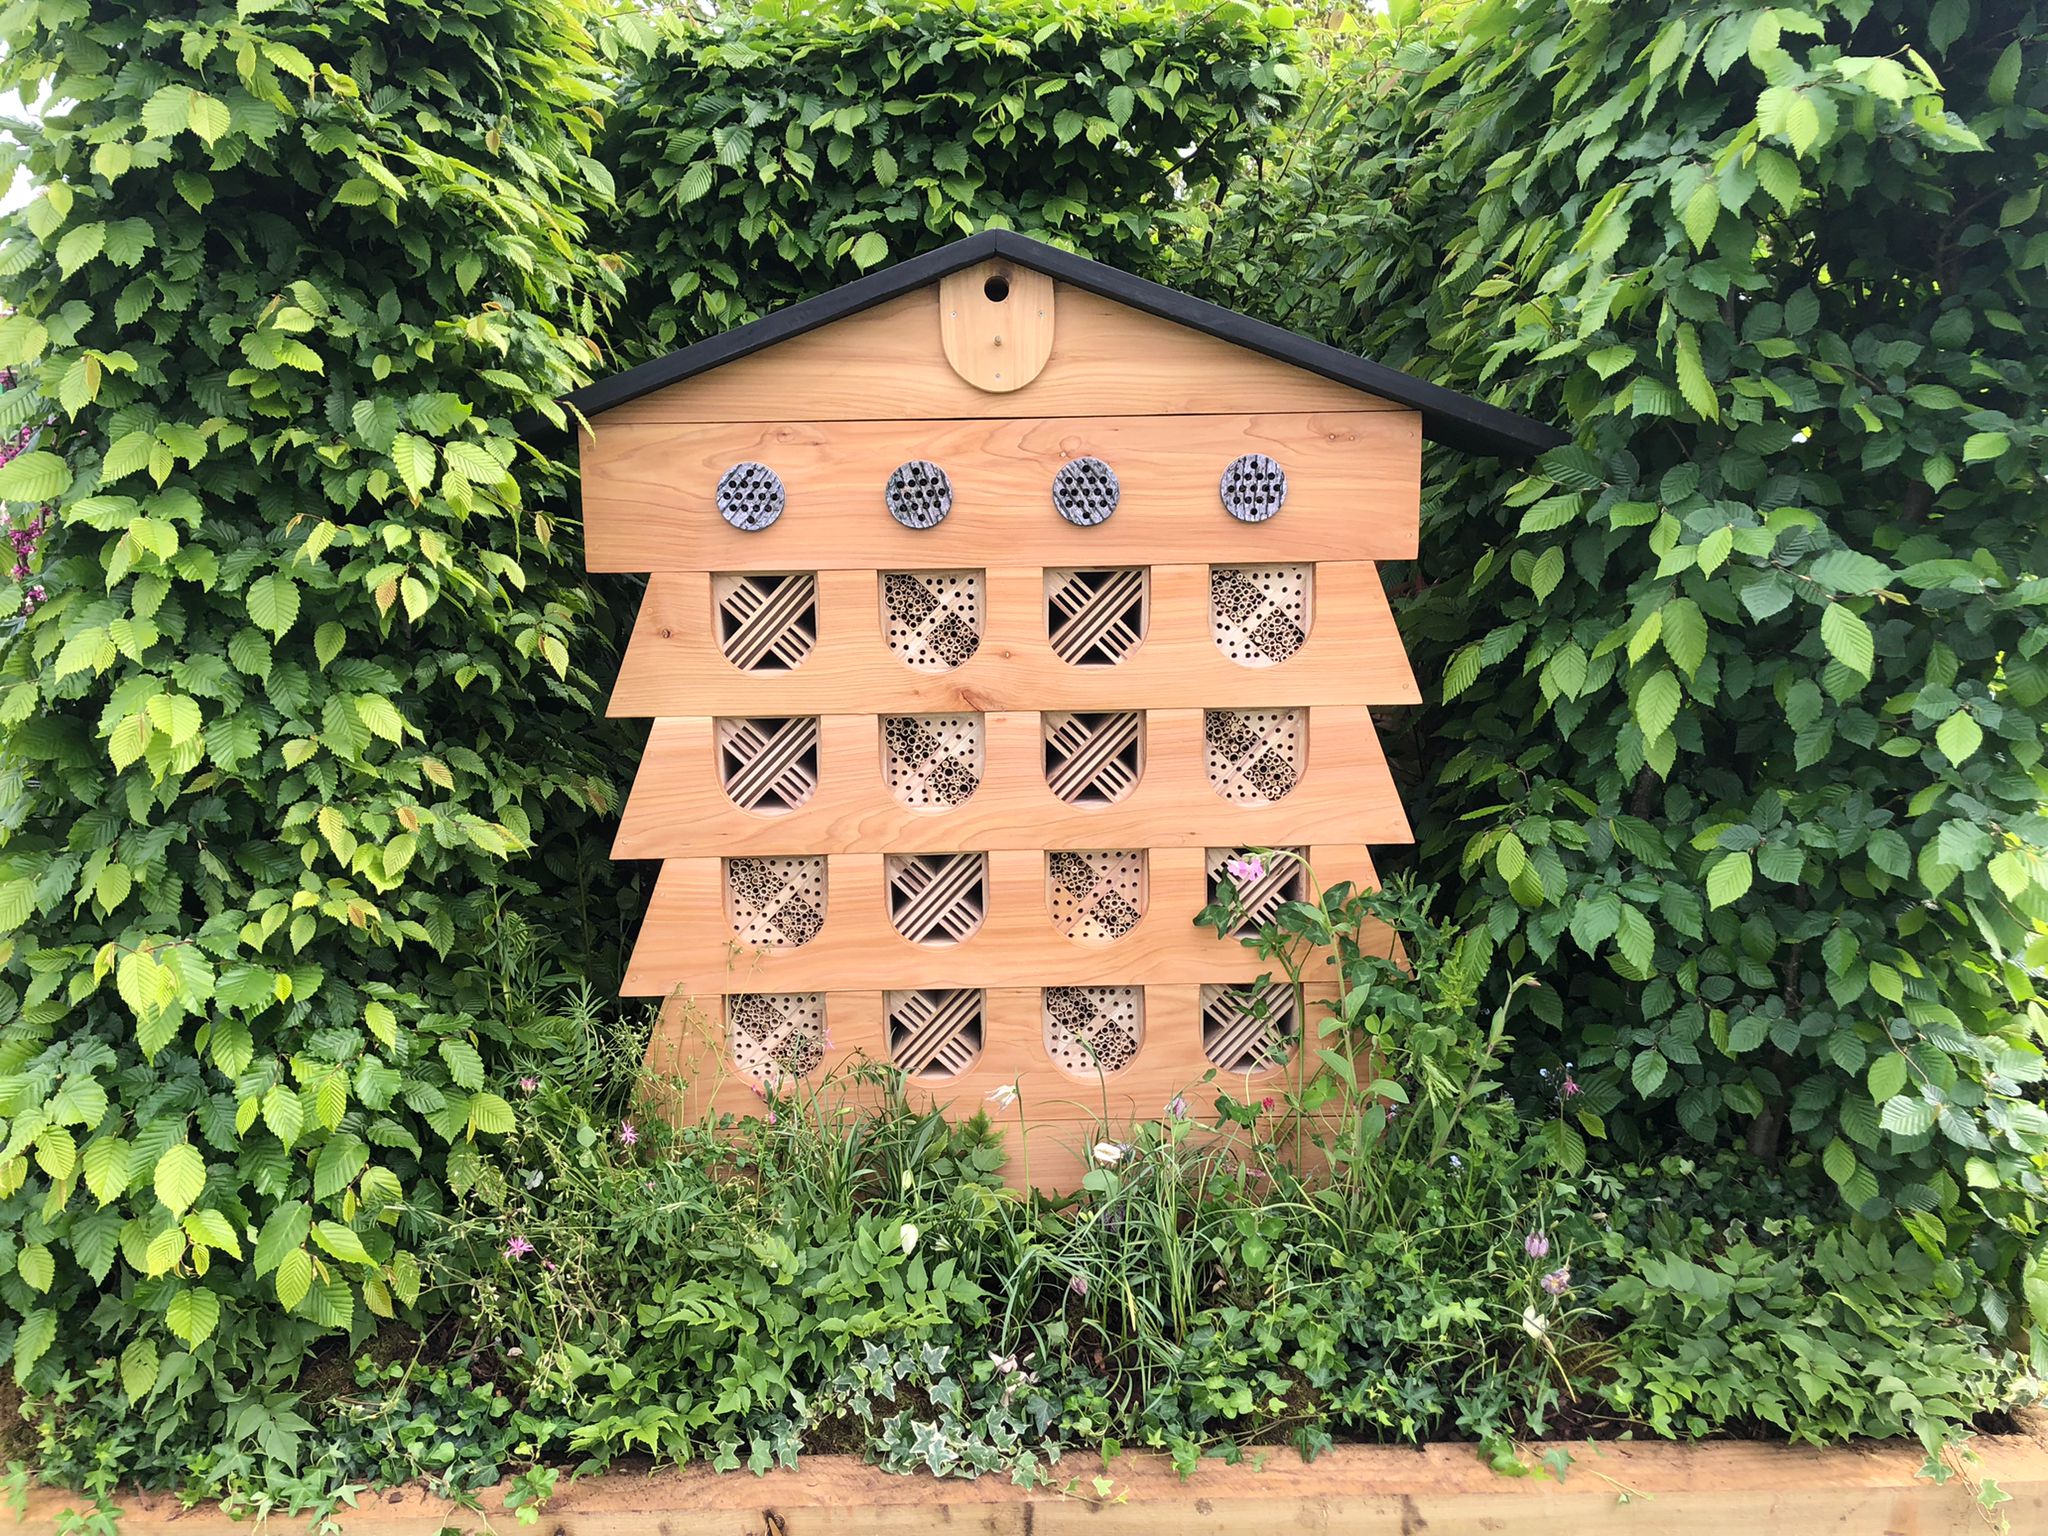 A large wooden insect hotel for wildlife amongst some bushes as Gardeners' World Spring Fair.